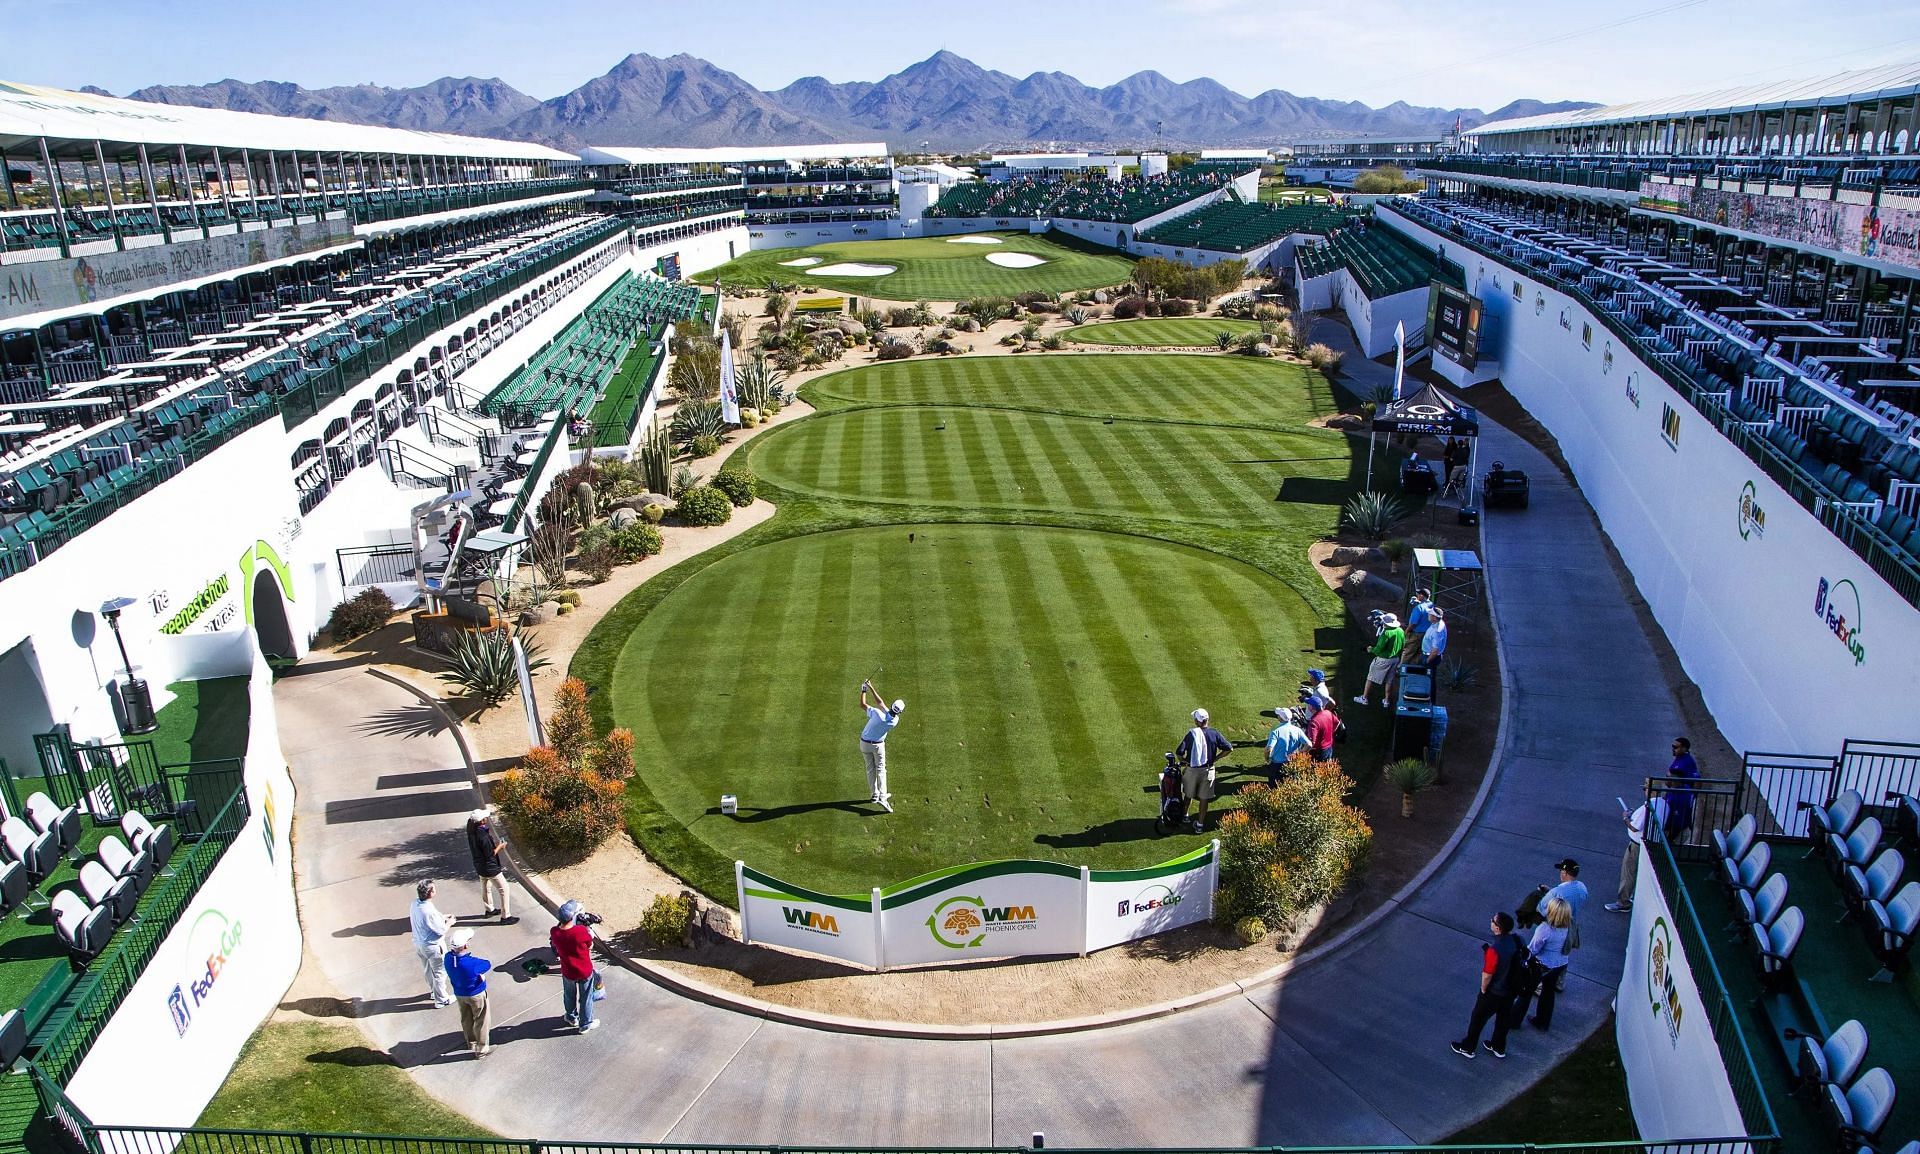 TPC Scottsdale will host the WM Phoenix Open for the 36th time